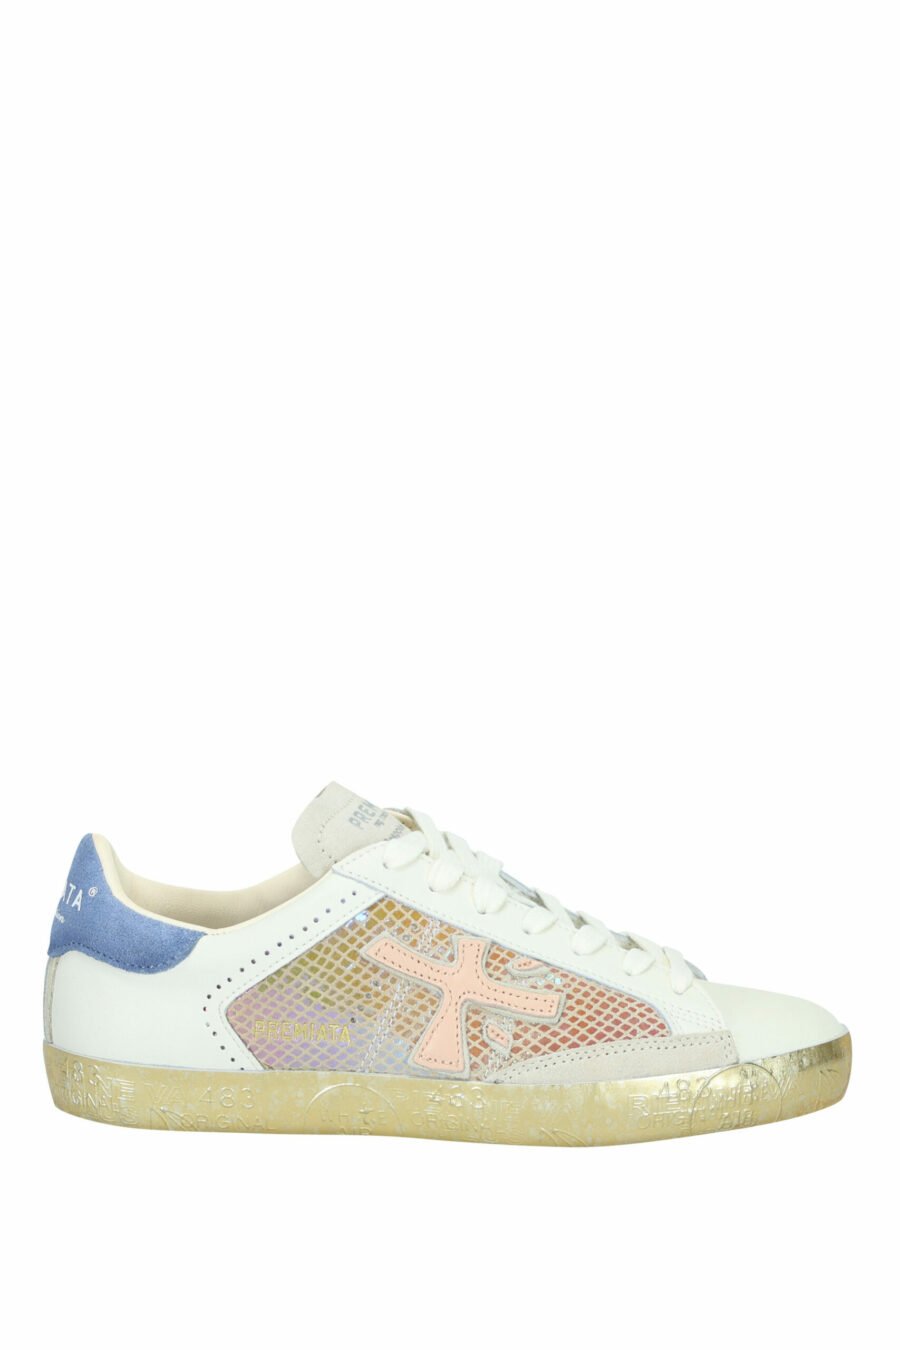 Multicoloured white trainers with gold sole "Stevend 6666" - 8053680396552 scaled